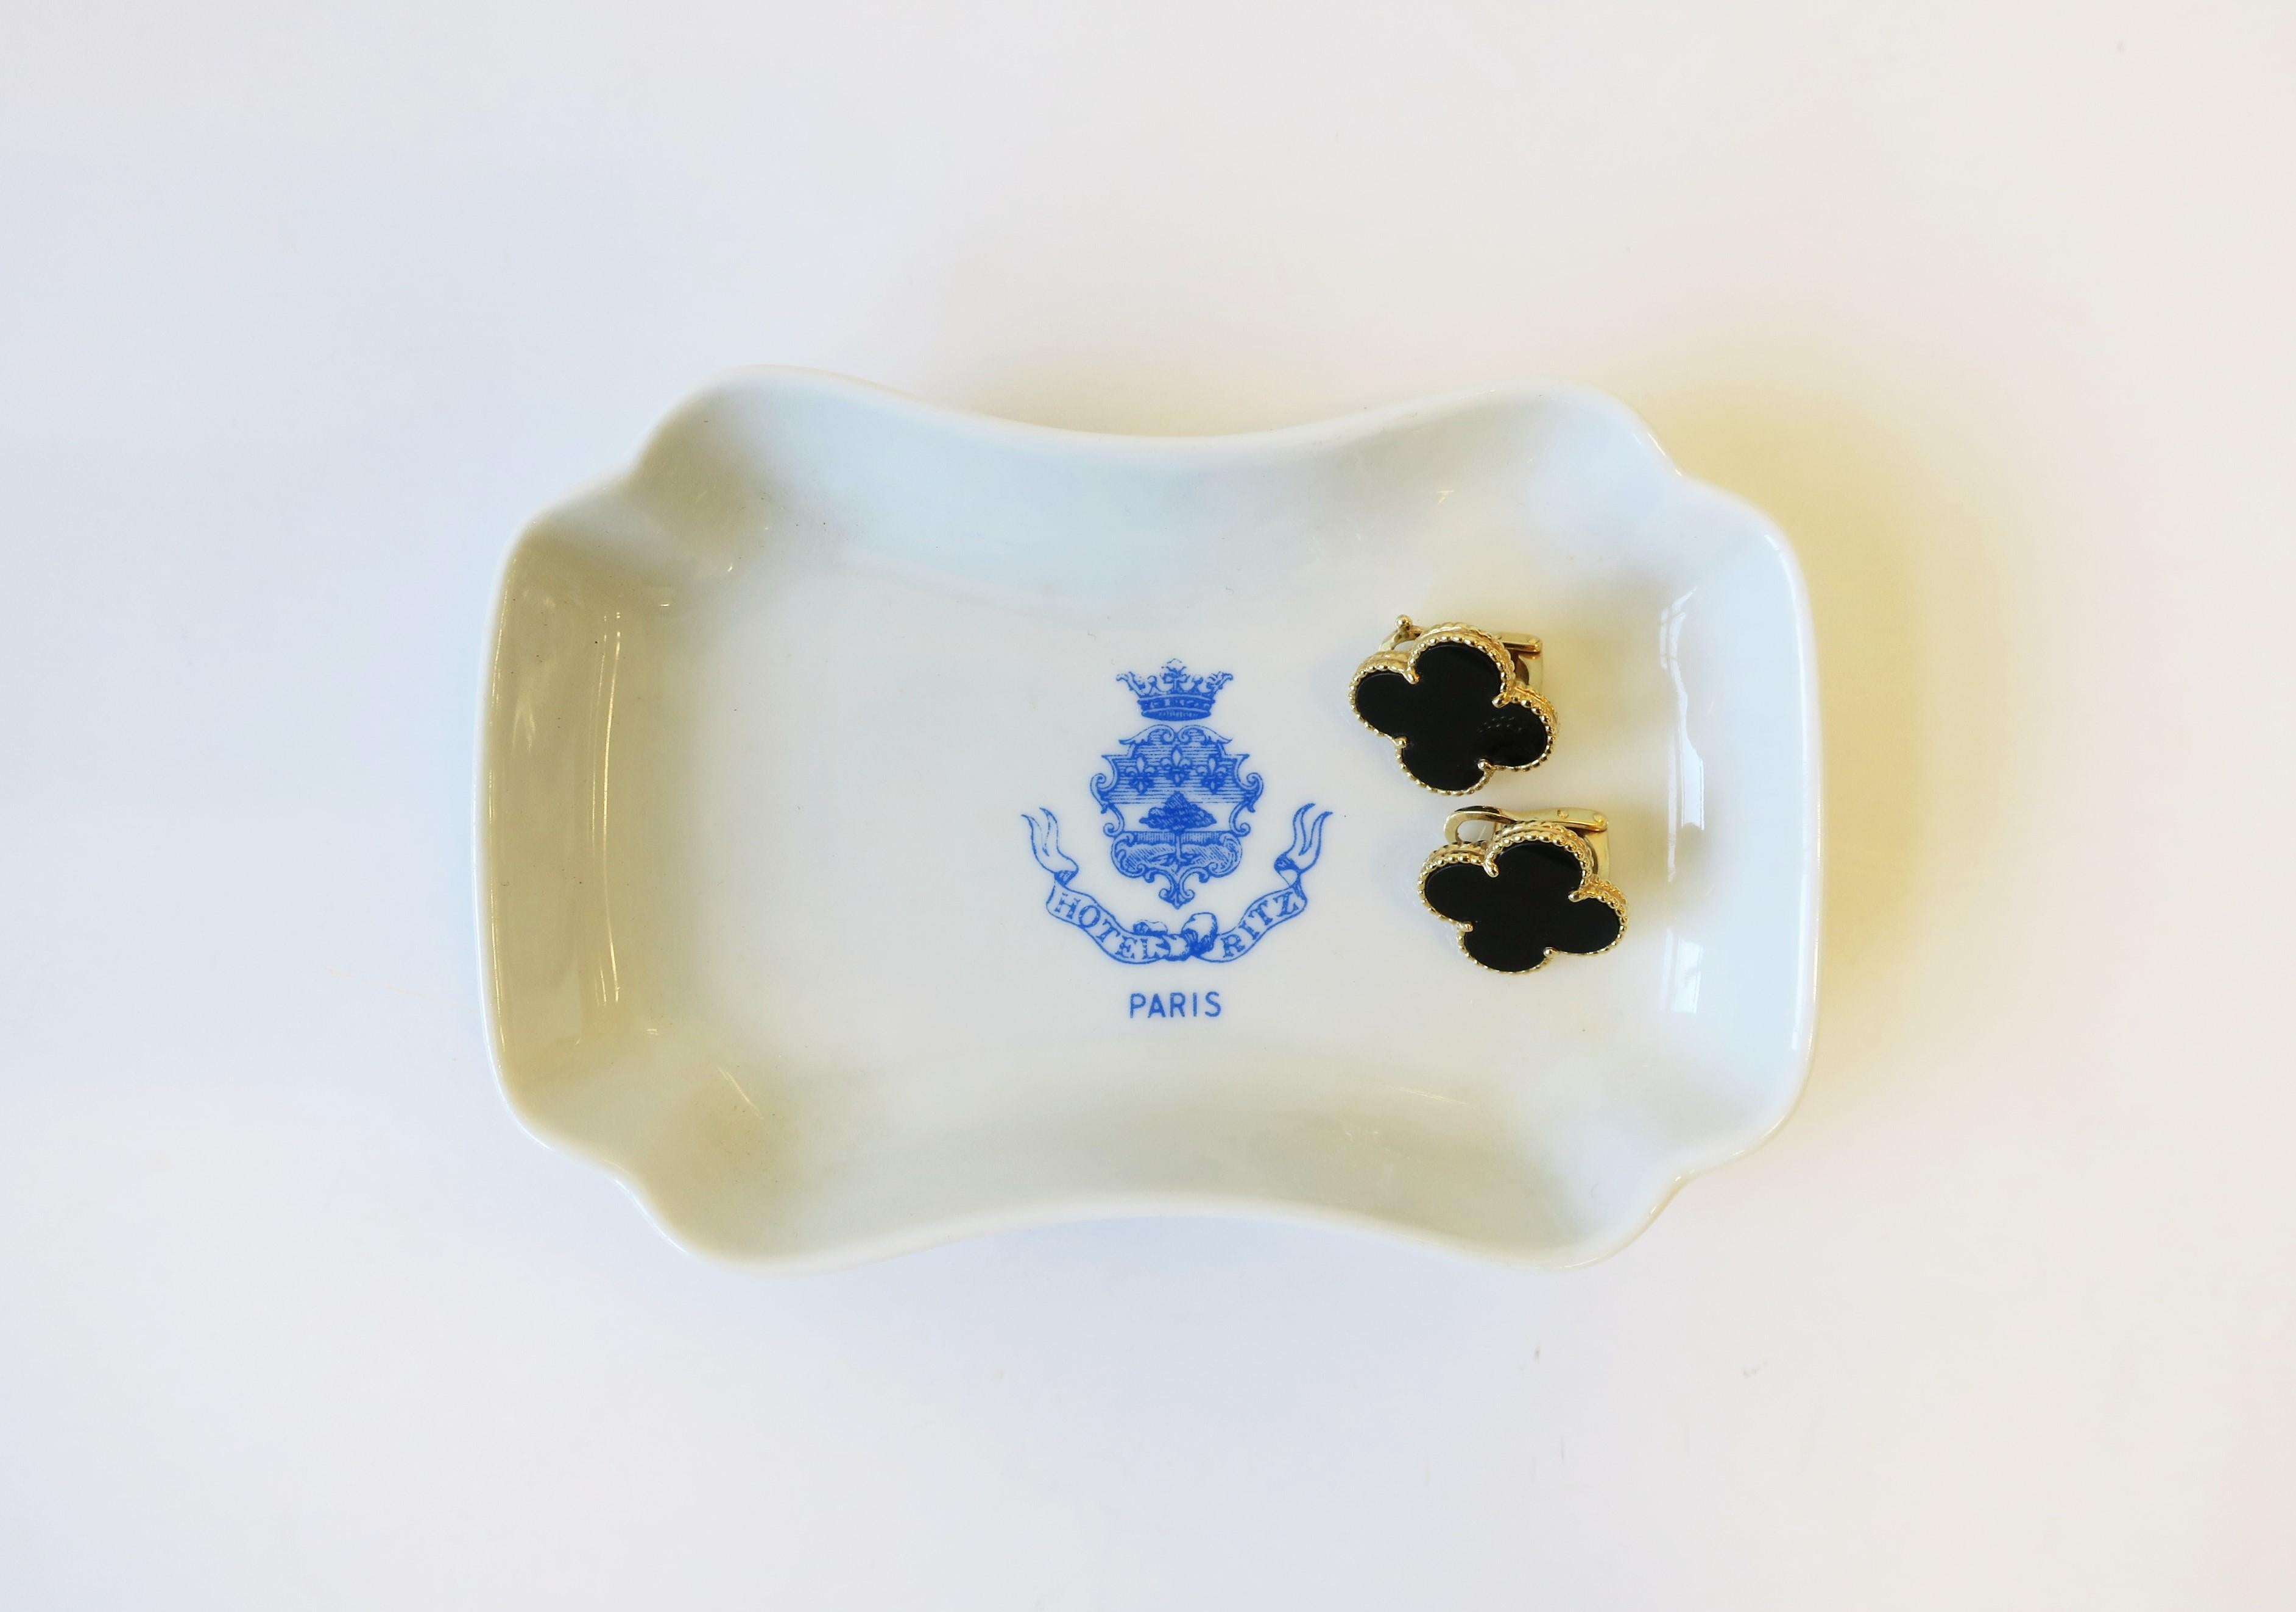 French Hotel Ritz Paris Blue and White Porcelain Jewelry Dish, France